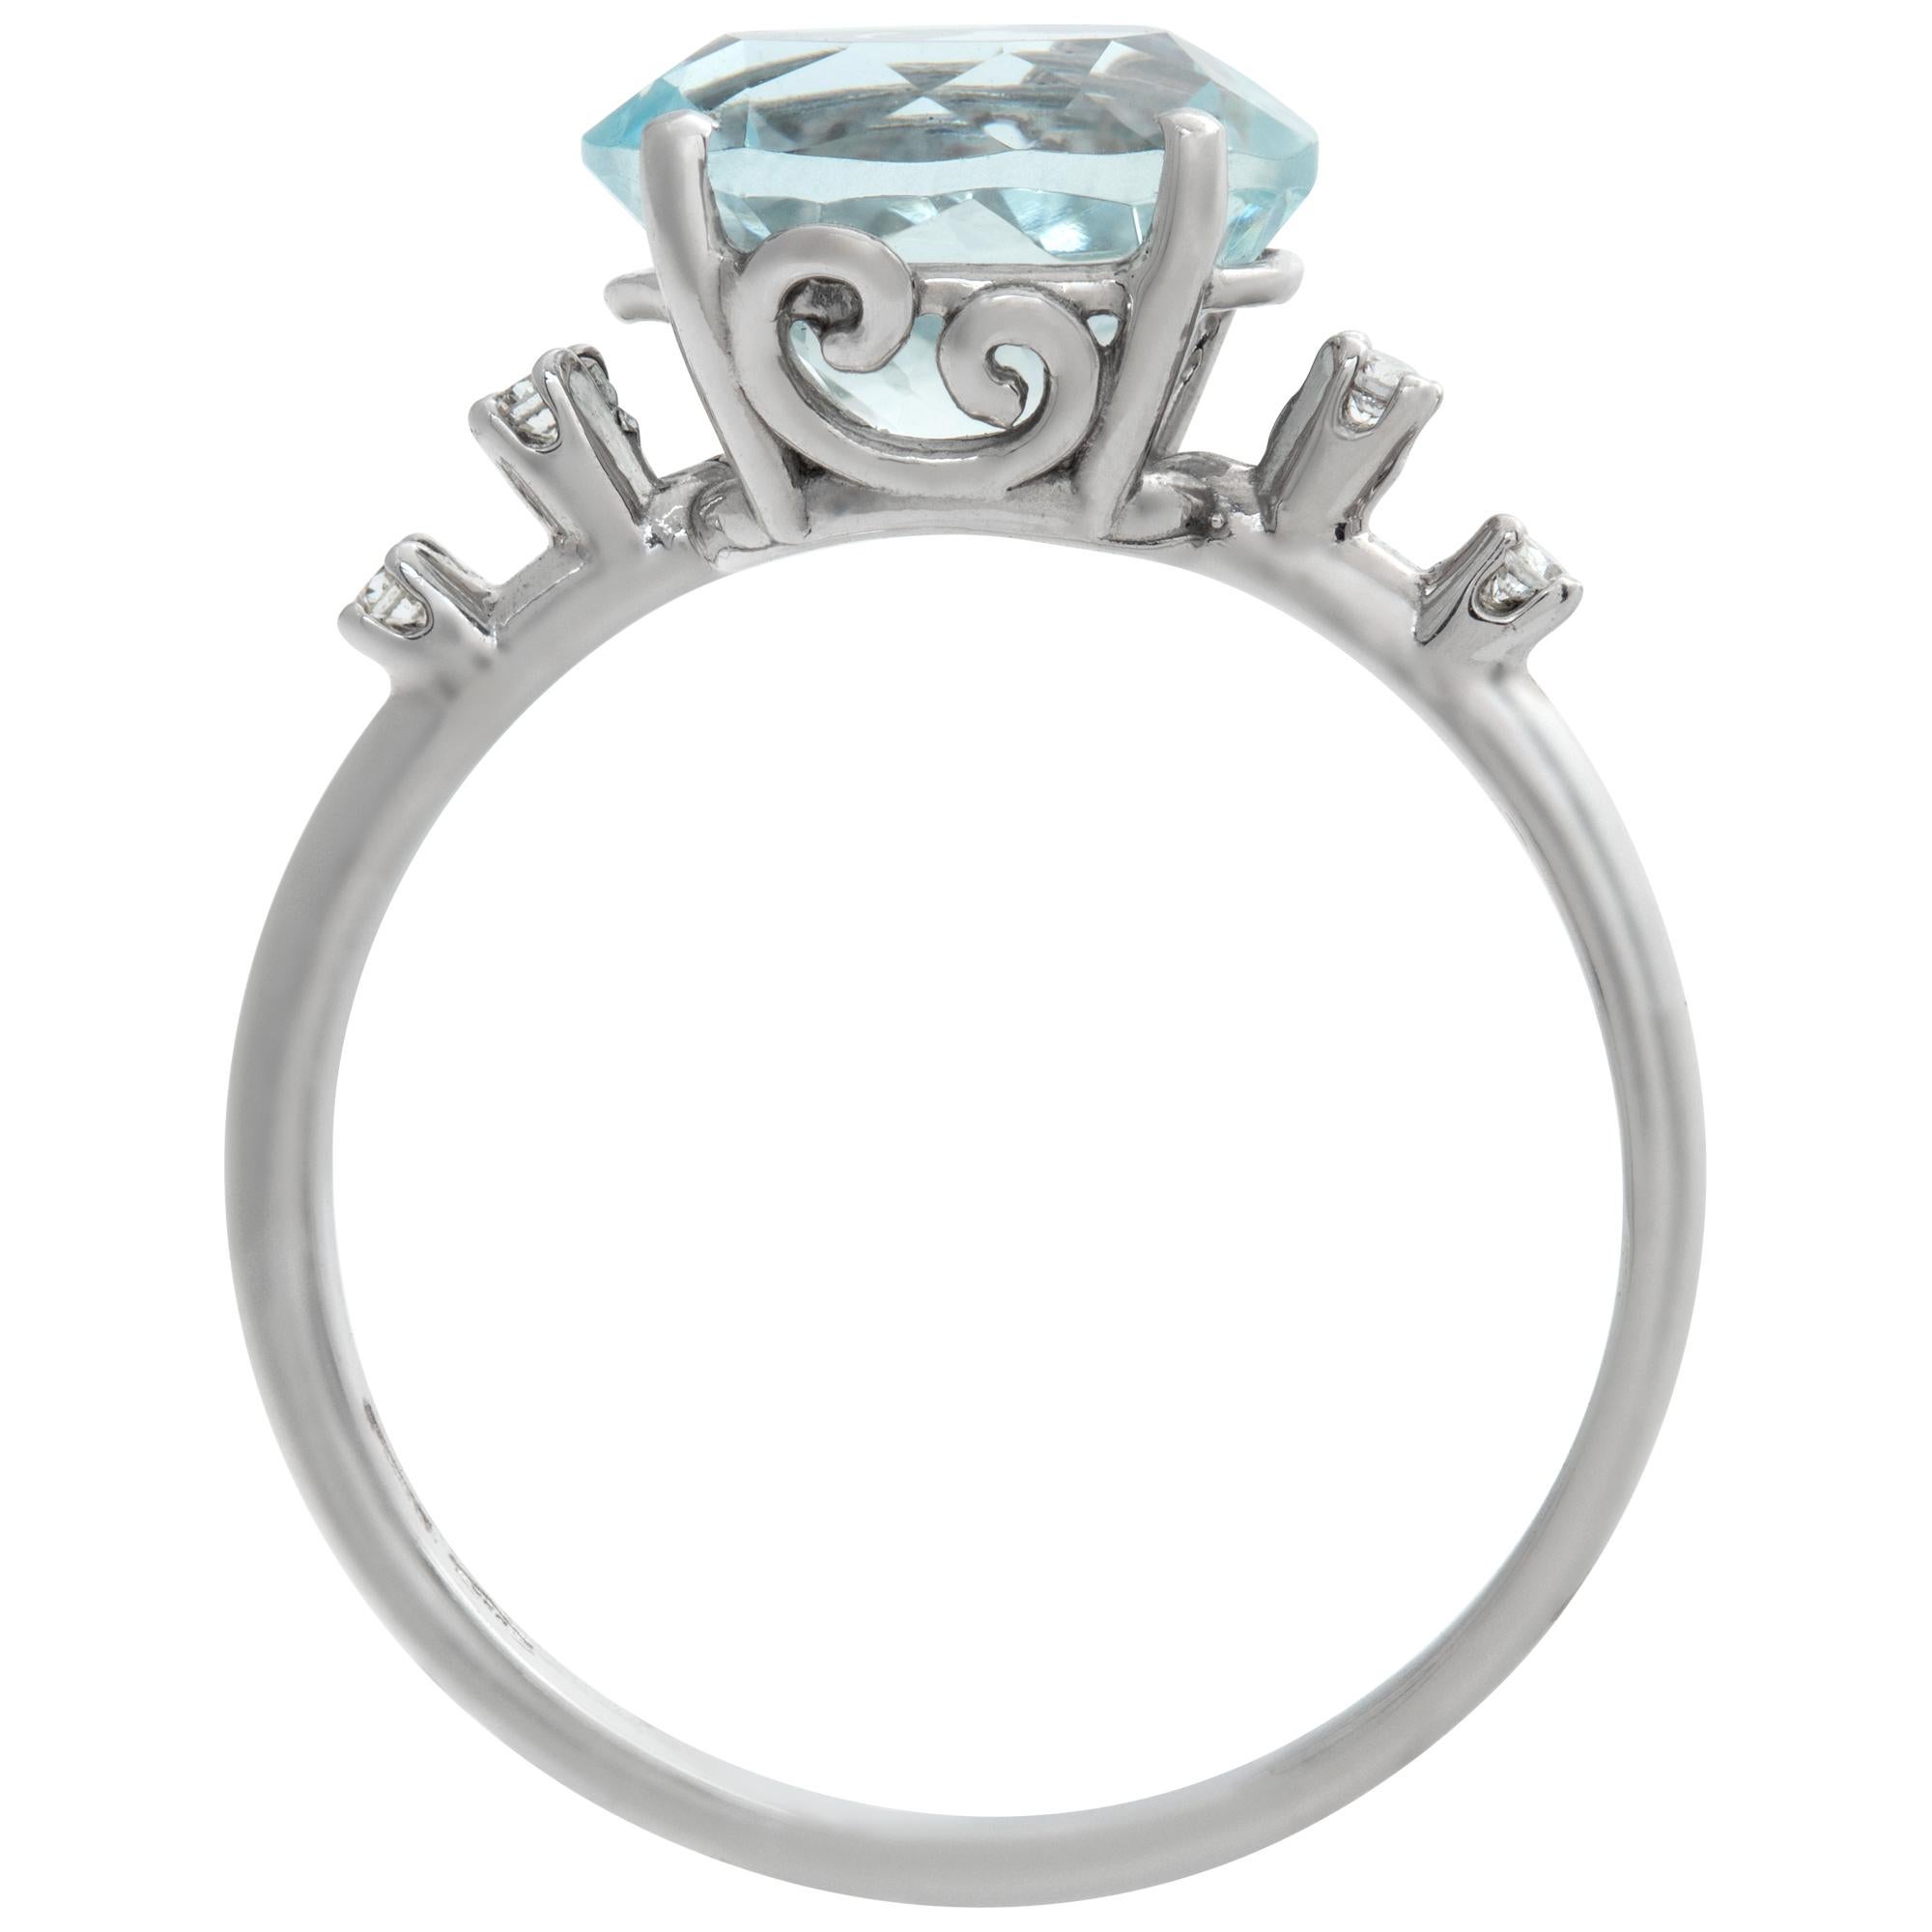 Oval Cut White Gold oval cut Aquamarine ring with diamonds accents